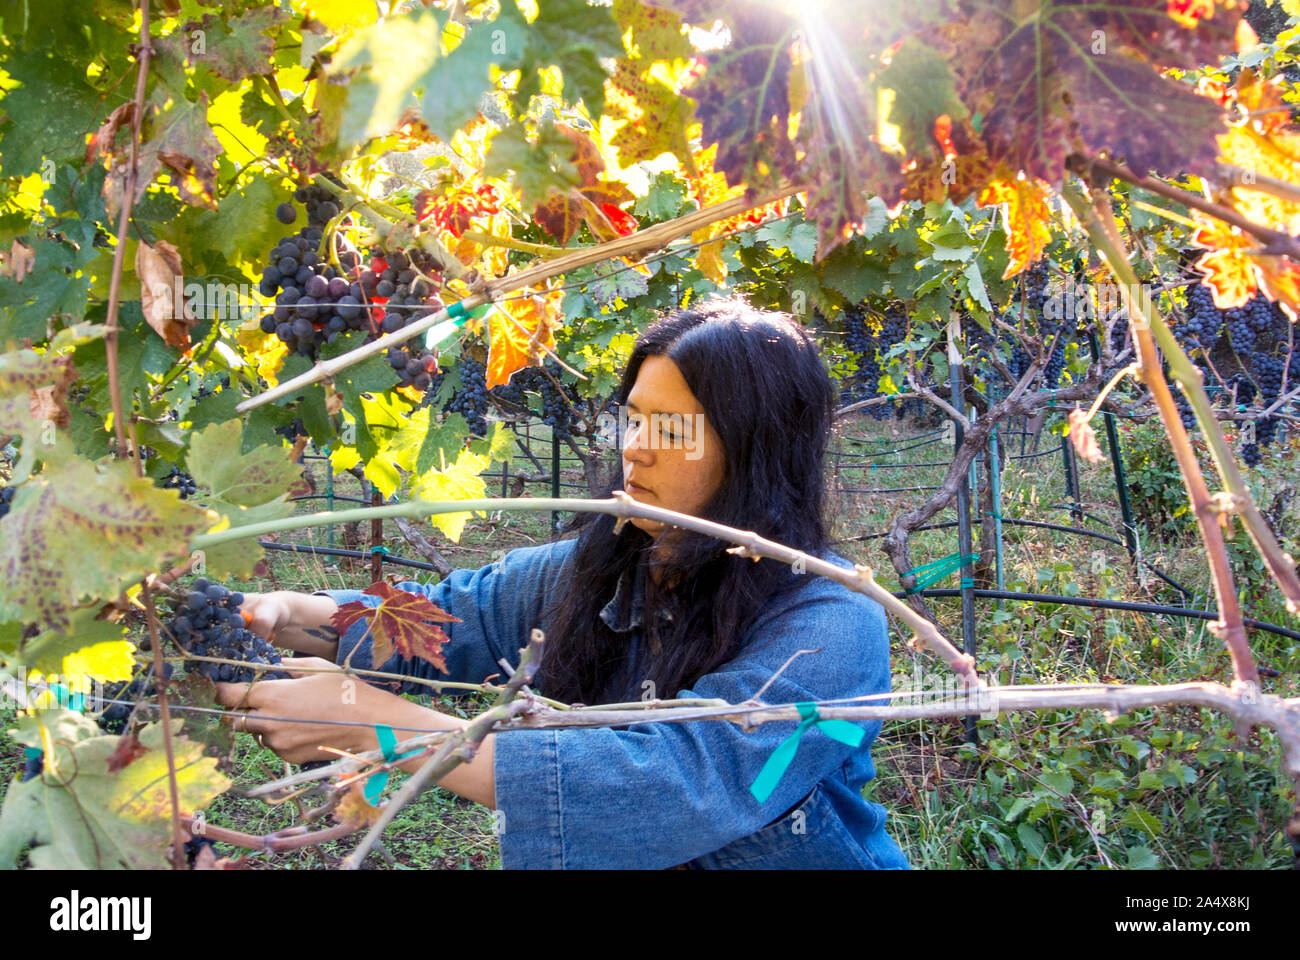 A young asian woman cuts grapes from a vine for winemaking. Stock Photo